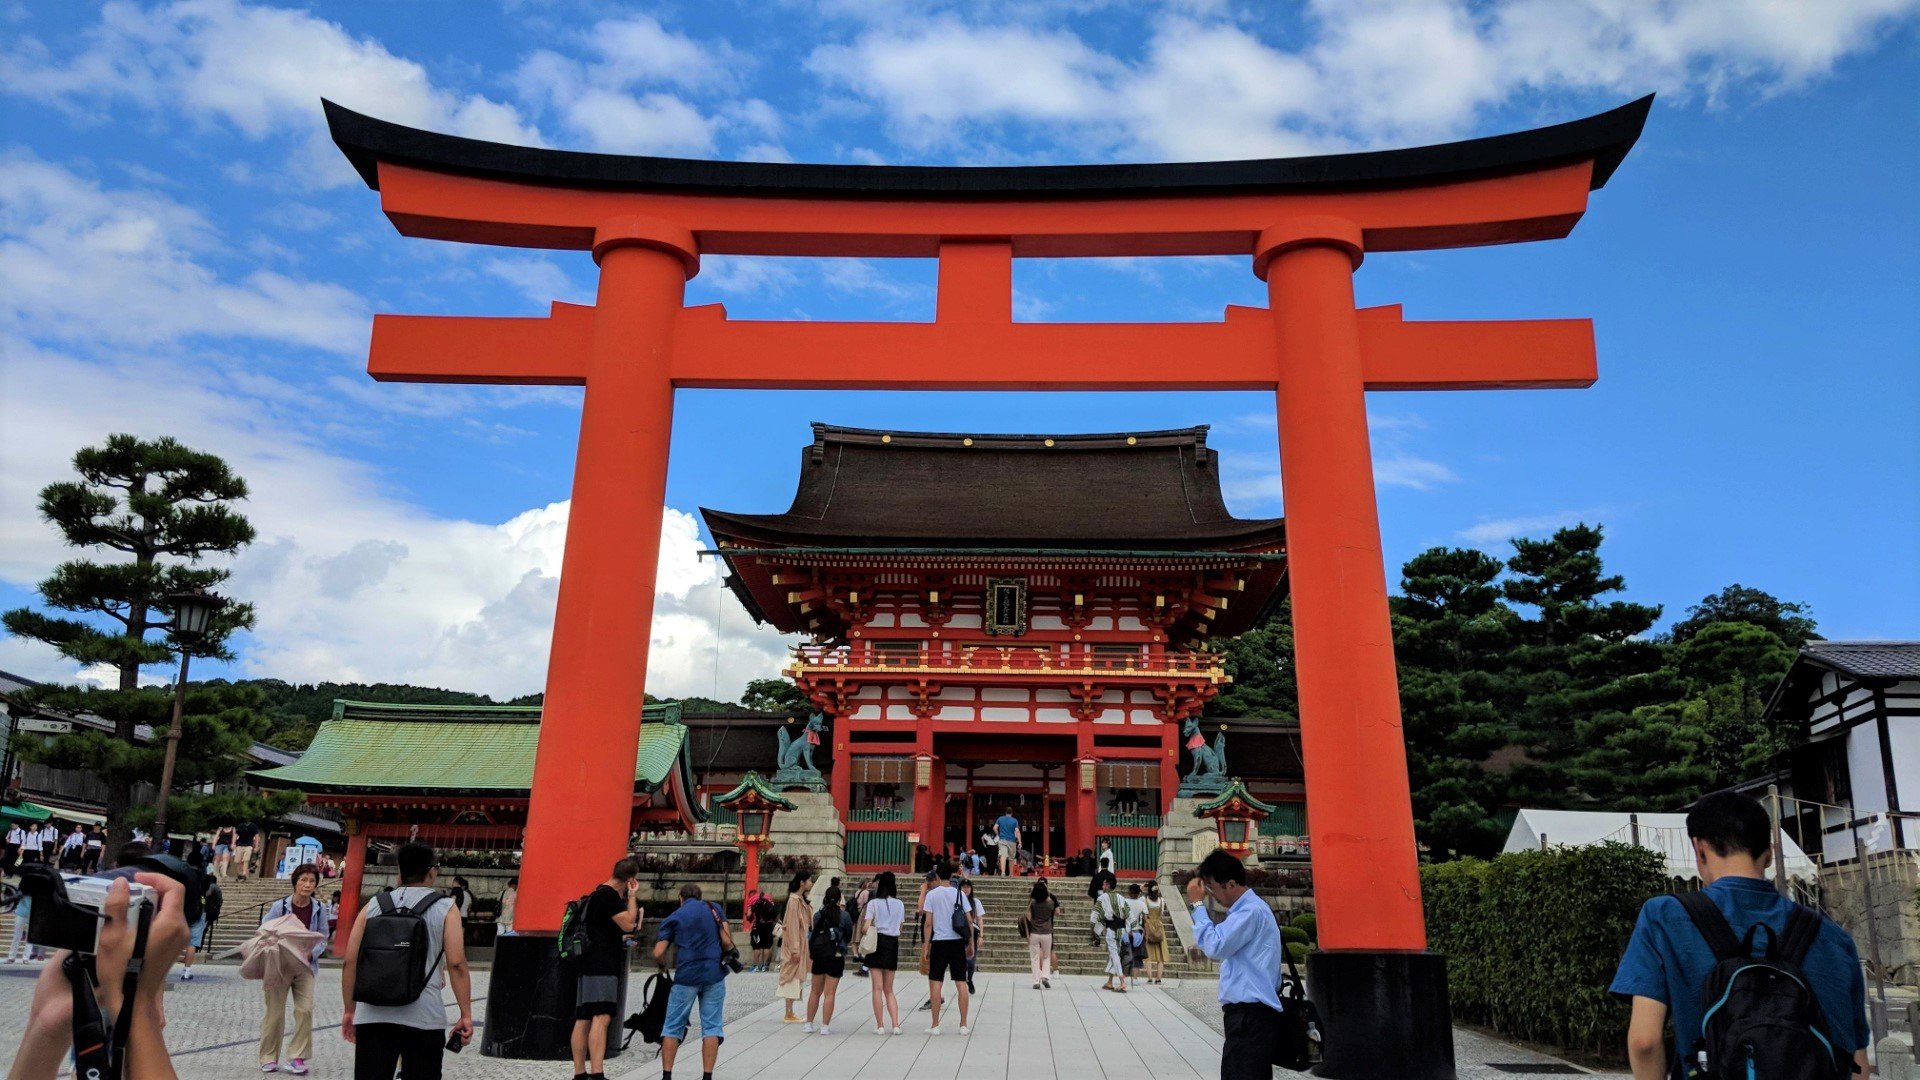 Absolute Best Japan Travel Books Guide For All Types of Travellers